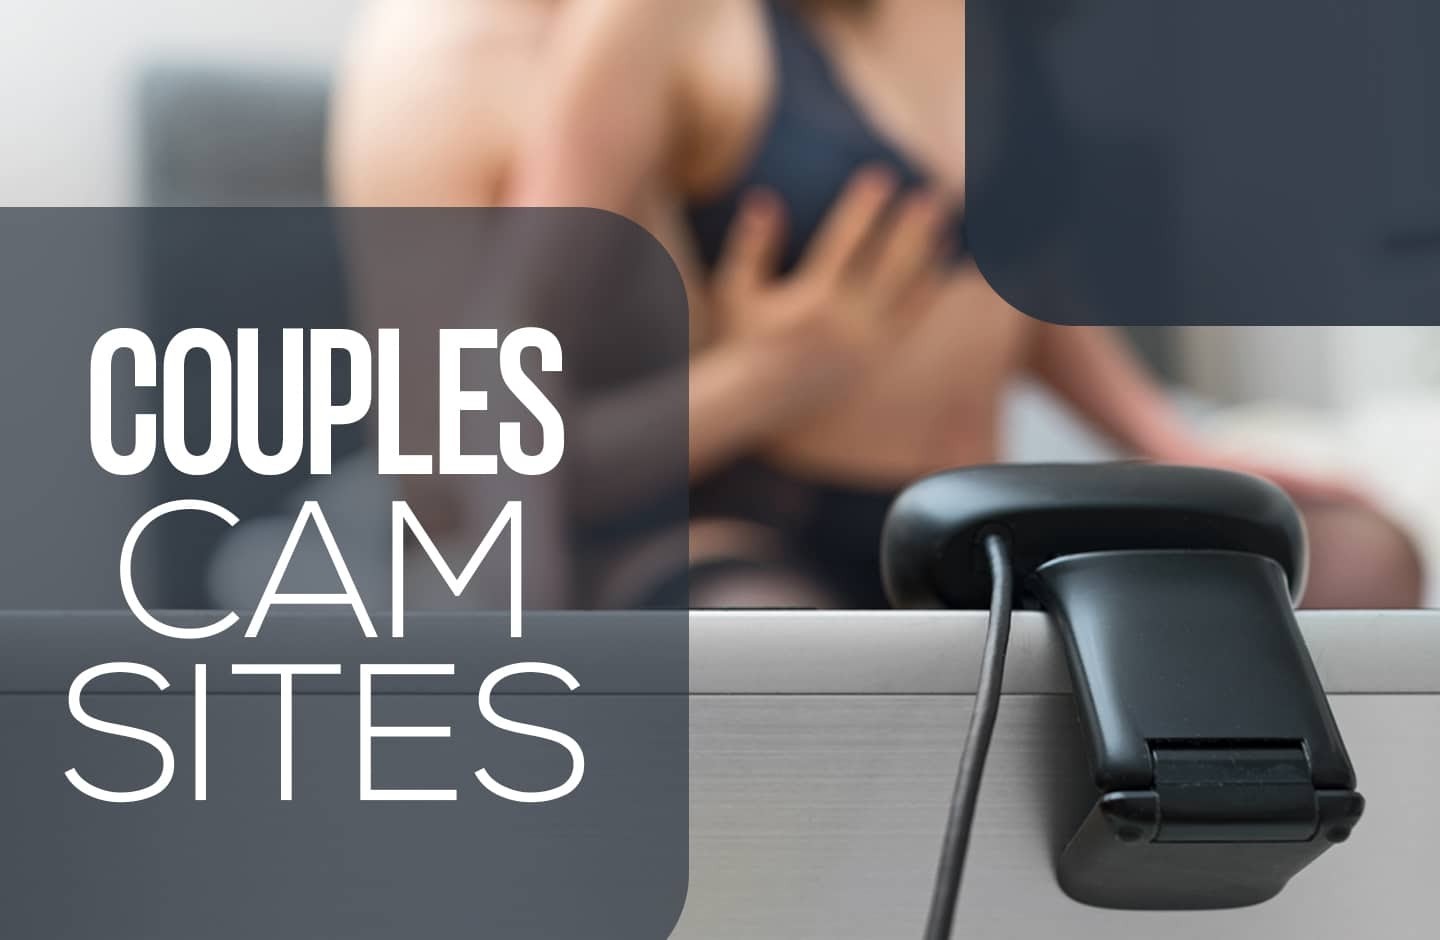 Top 6 Couples Cam Sites Reviewed